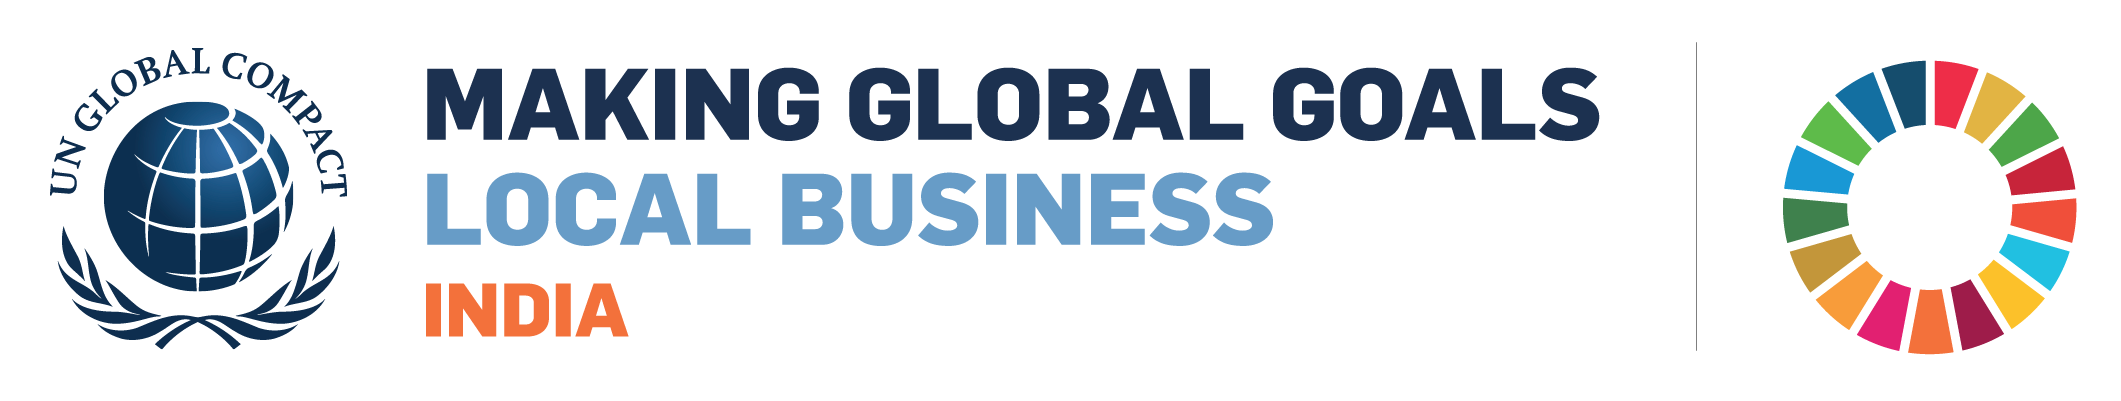 https://www.unglobalcompact.org/take-action/events/making-global-goals-local-business-india